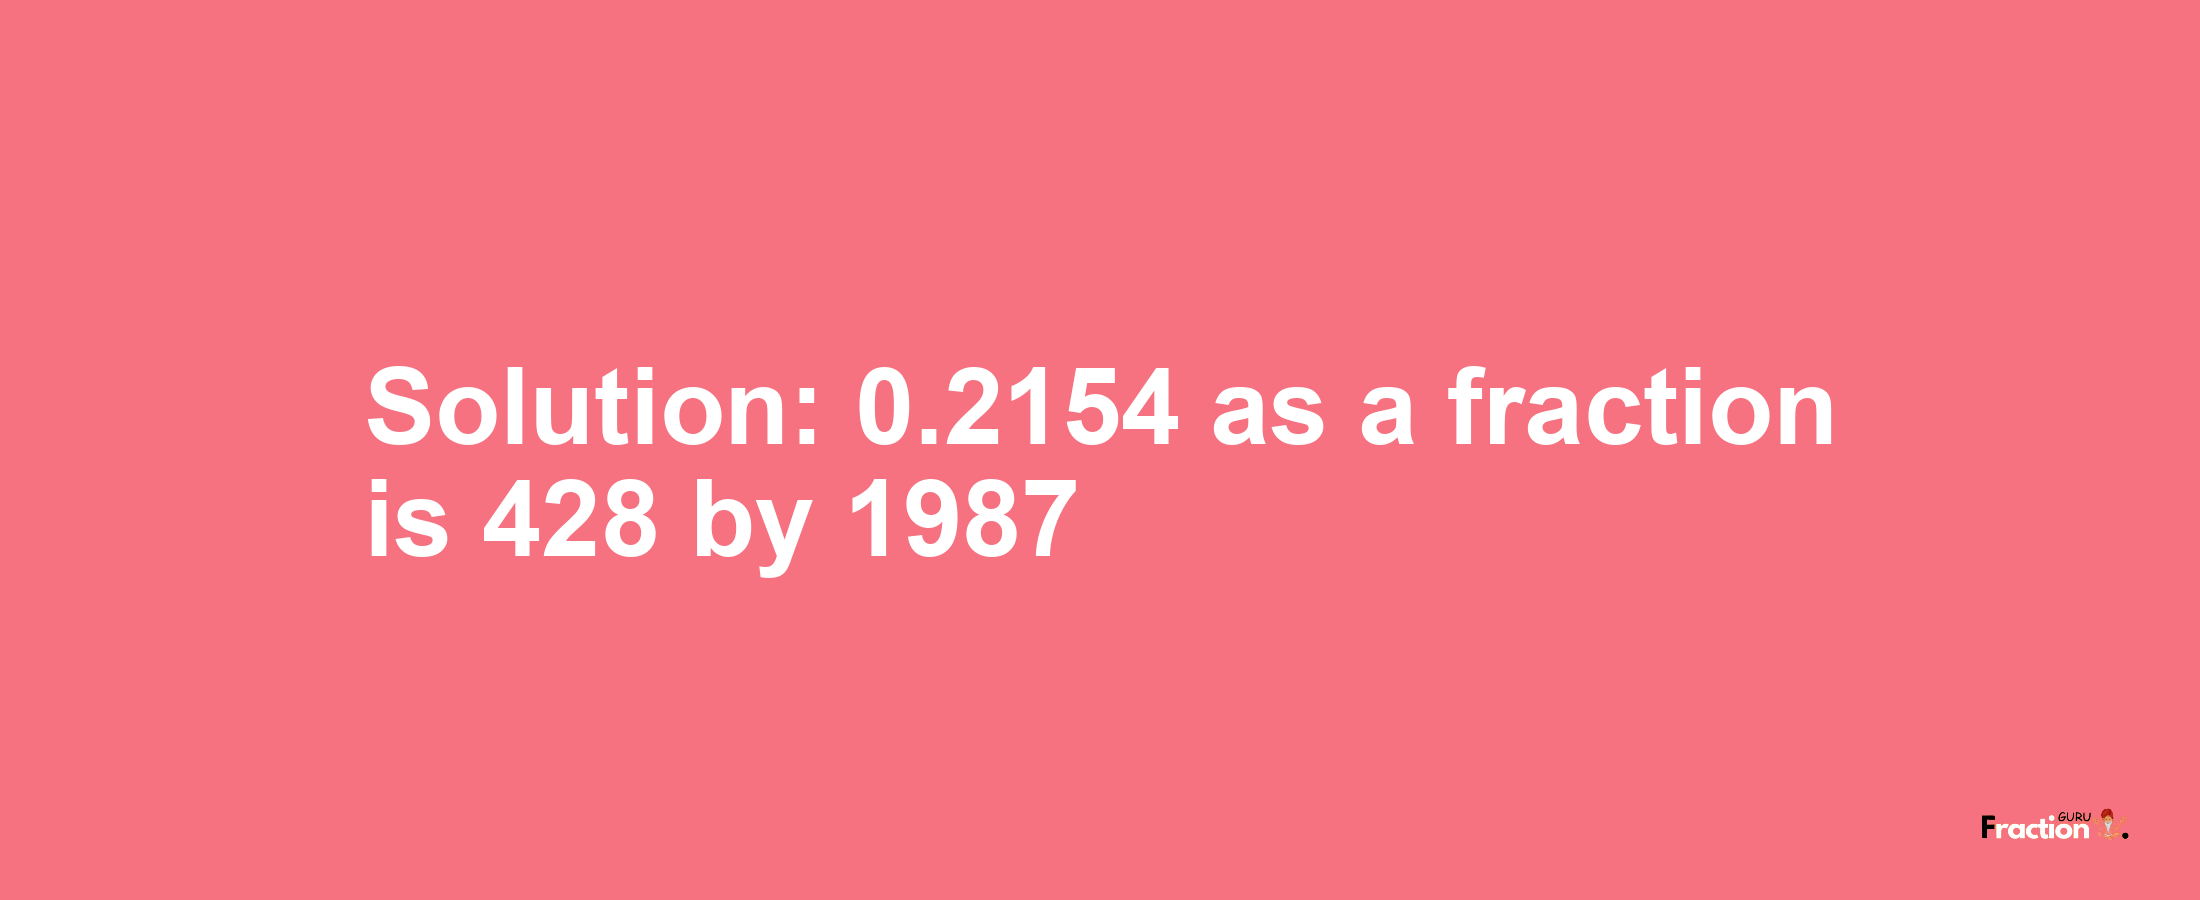 Solution:0.2154 as a fraction is 428/1987